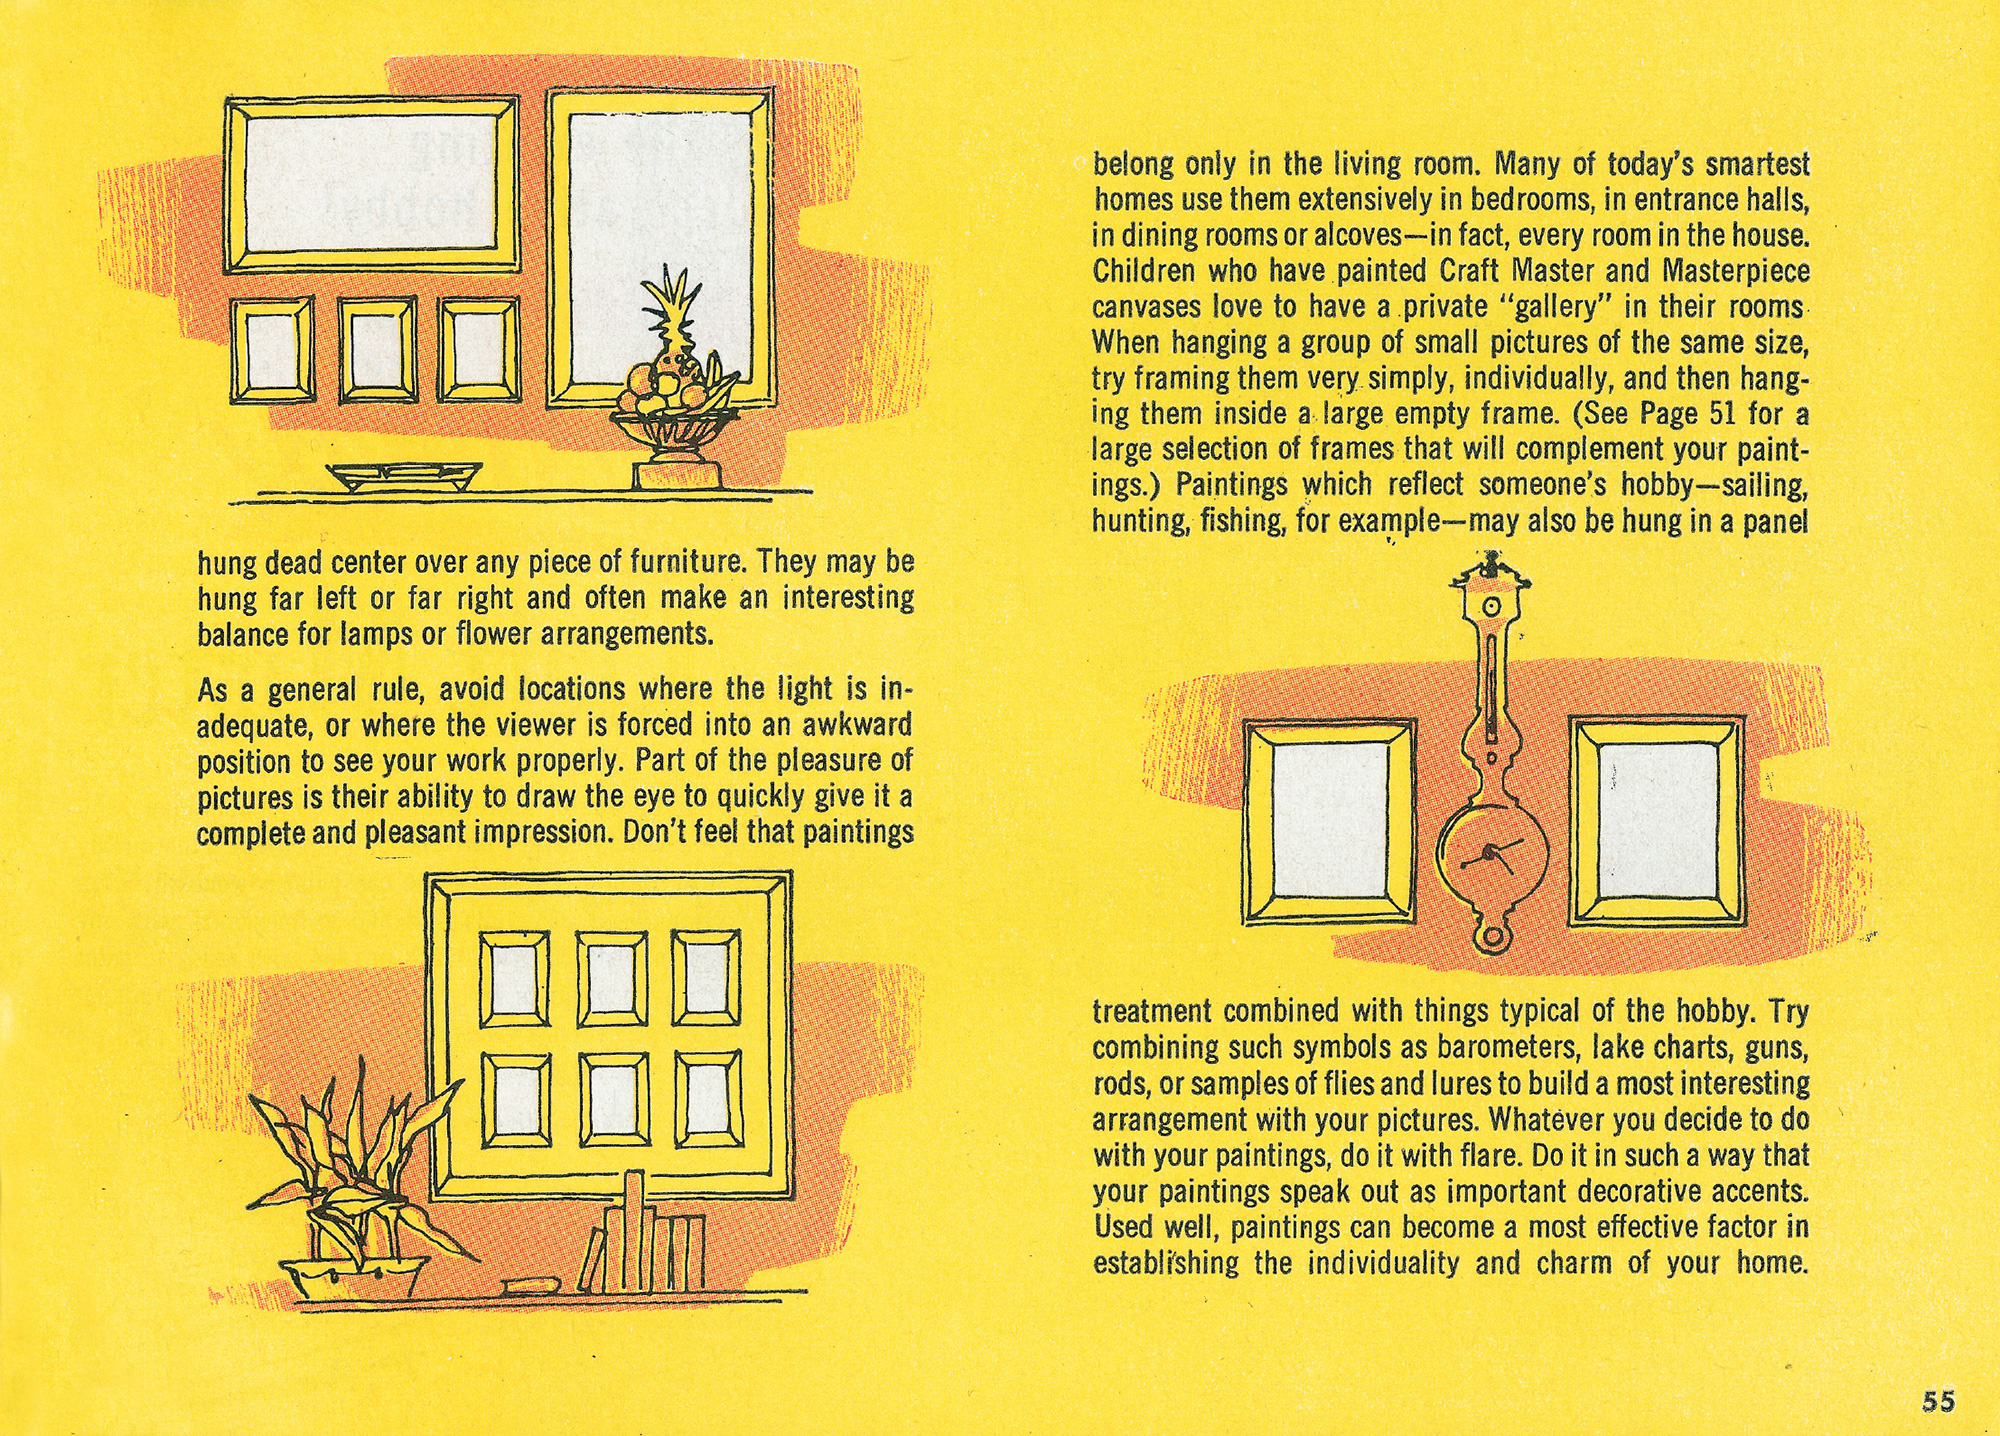 An image from the nineteen fifty four Craft Master paint by number catalogue, depicting advice for decorative ways to hang pictures.